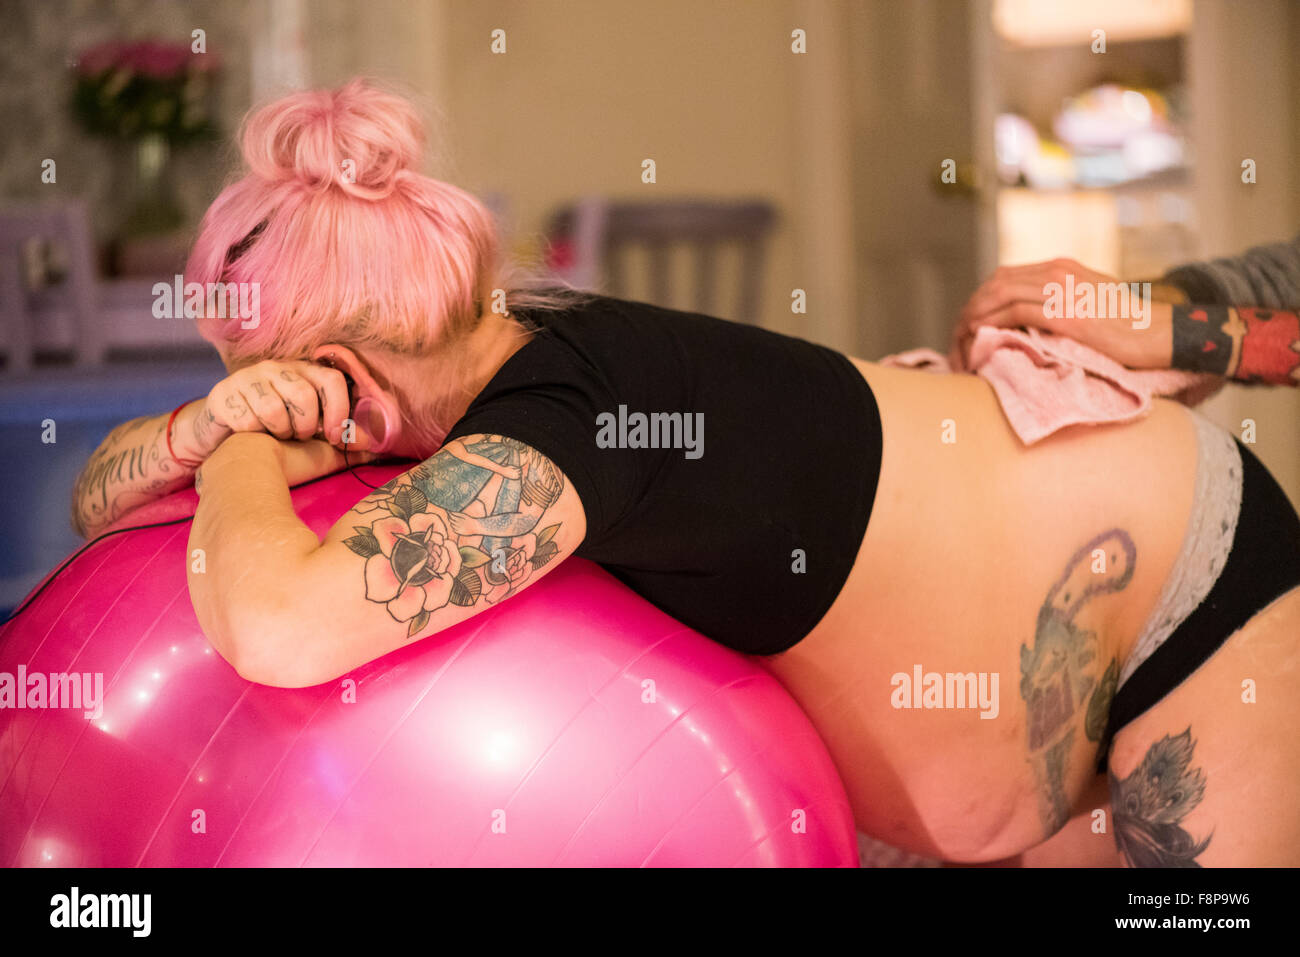 Woman in labour leaning on a yoga ball and having an ice pack held to her back by her partner at an unassisted home birth Stock Photo